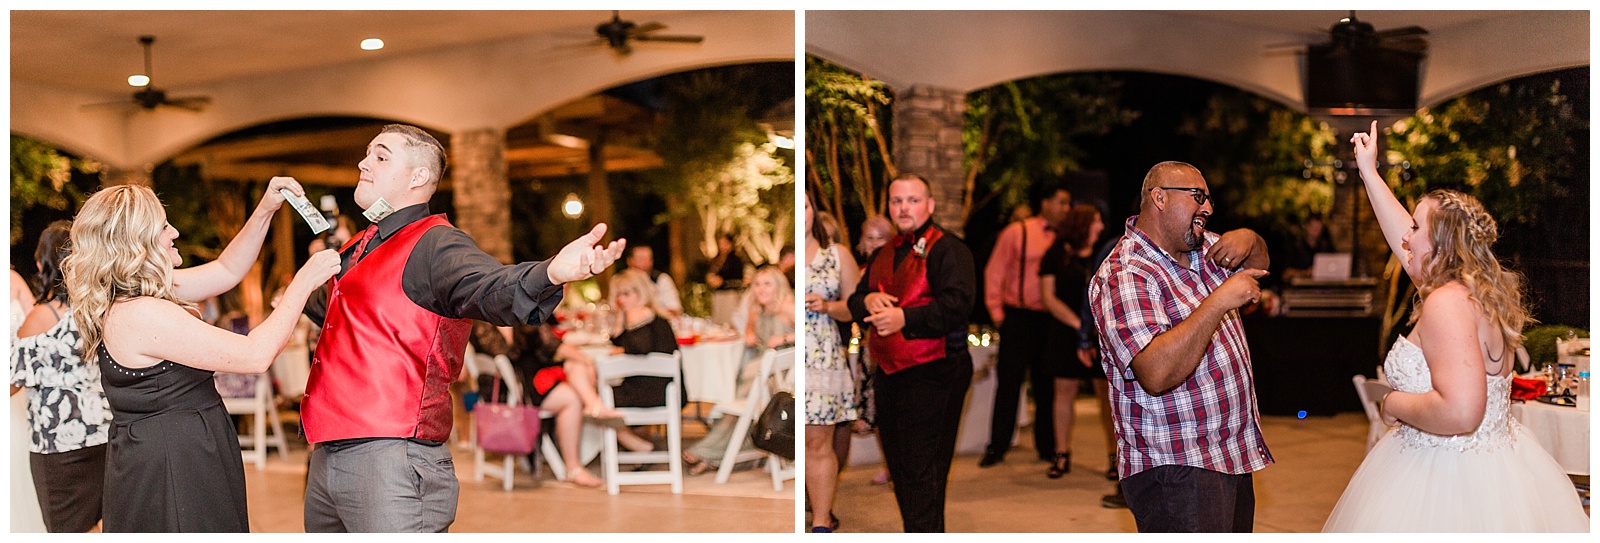 bride, groom and guests having fun dancing at their wedding reception